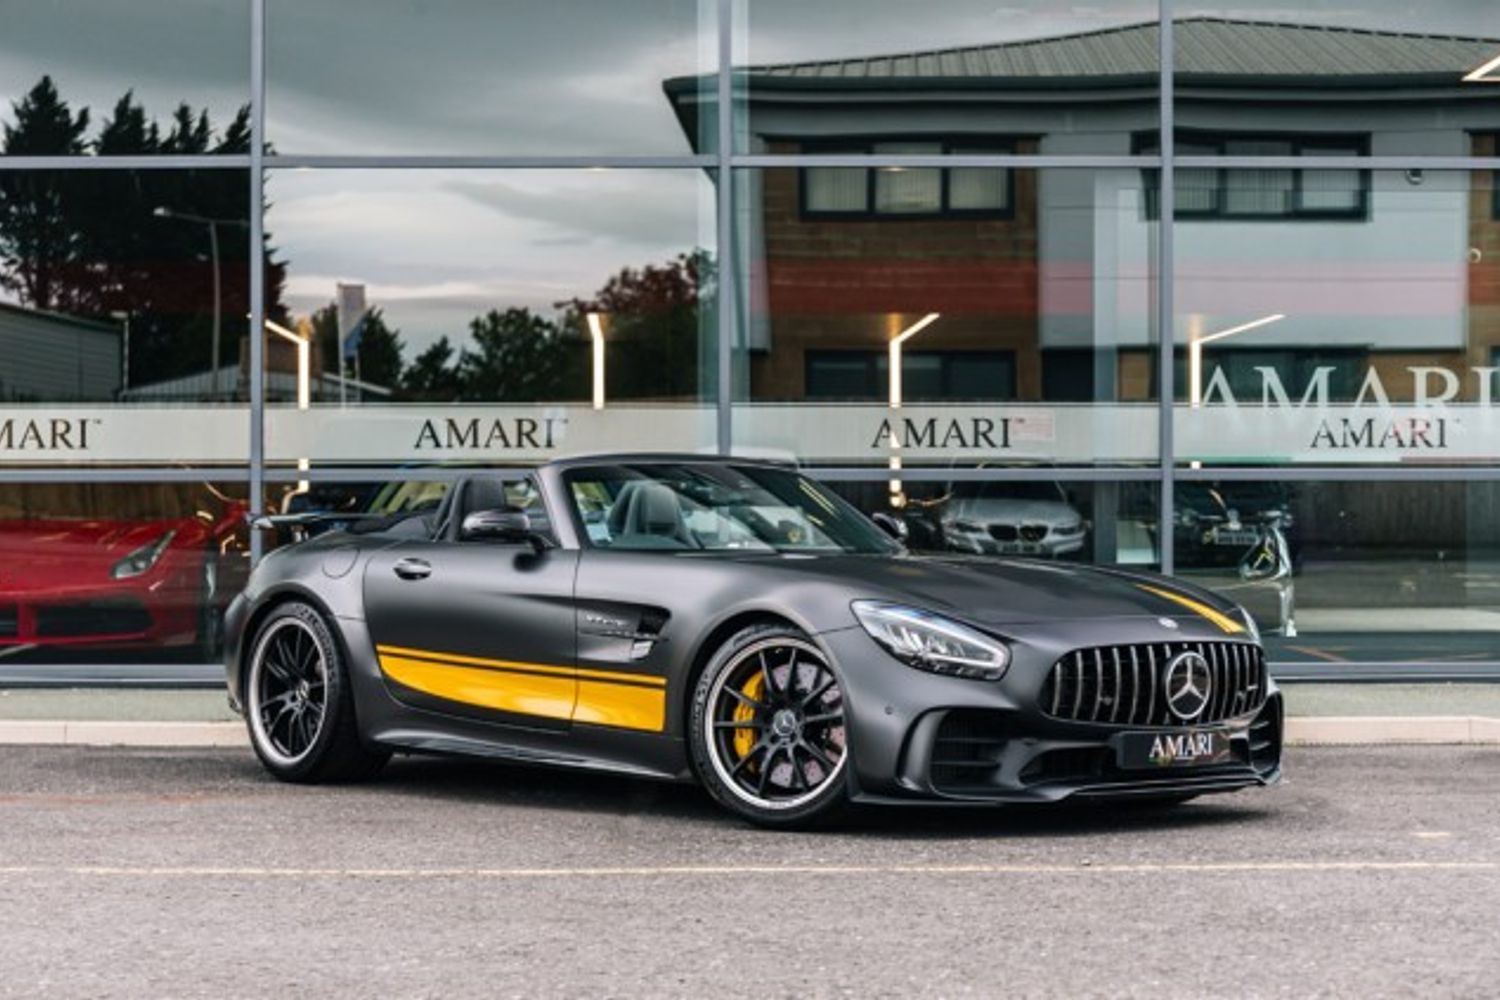 MERCEDES-BENZ GT AMG GT R CONVERTIBLE 4.0 AMG GT R 3DR AUTOMATIC